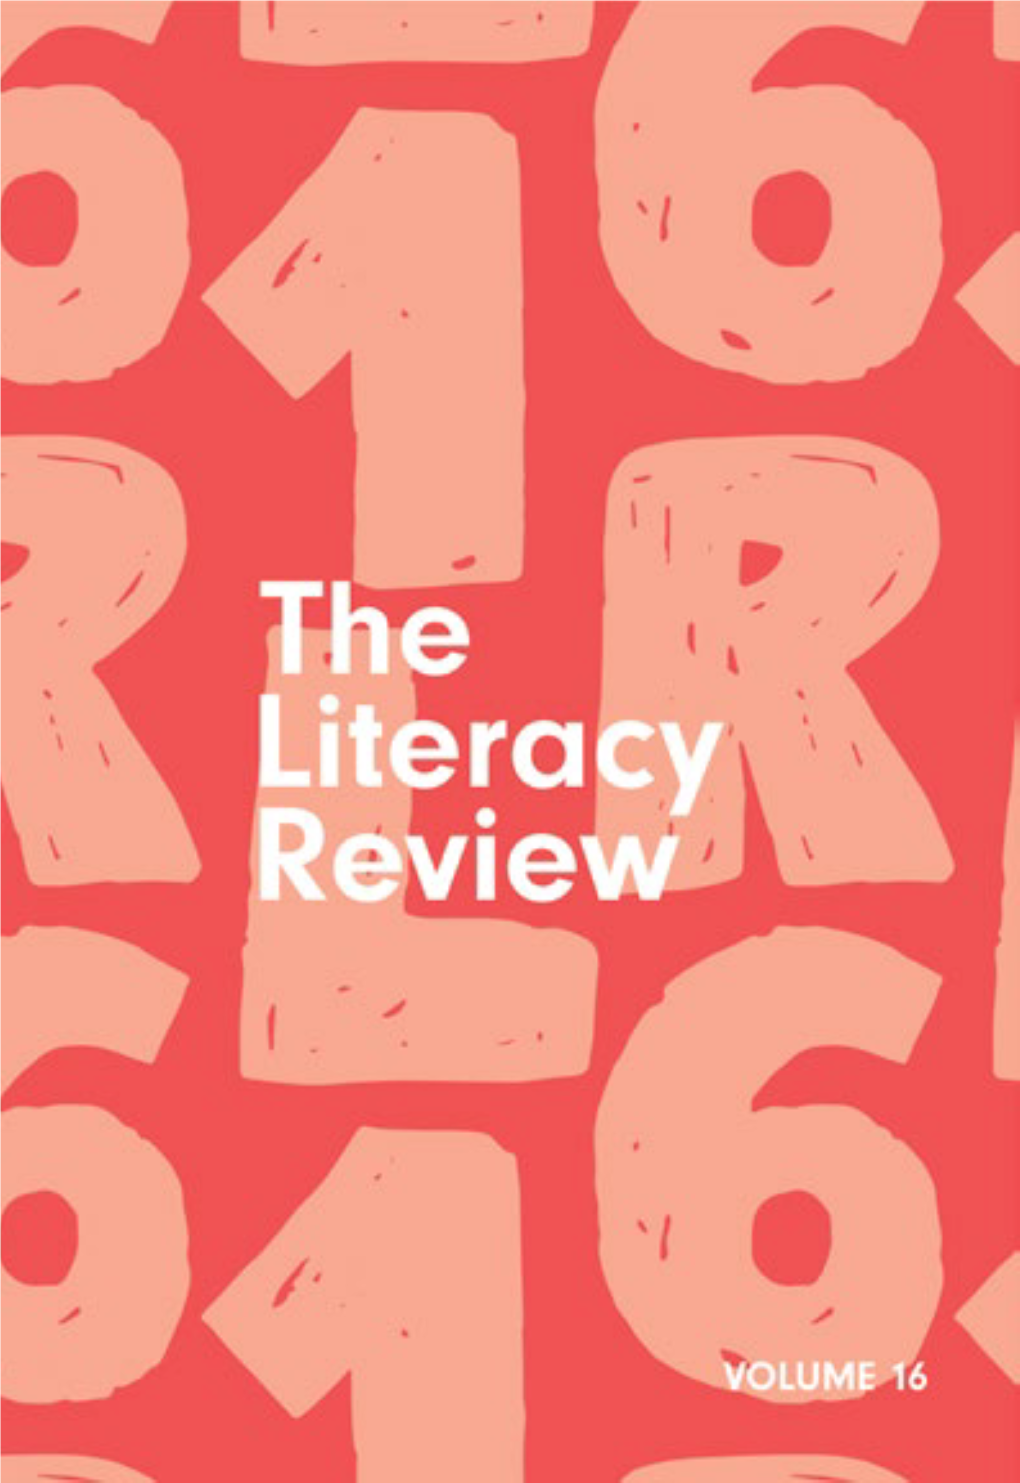 The Literacy Review VOLUME 16